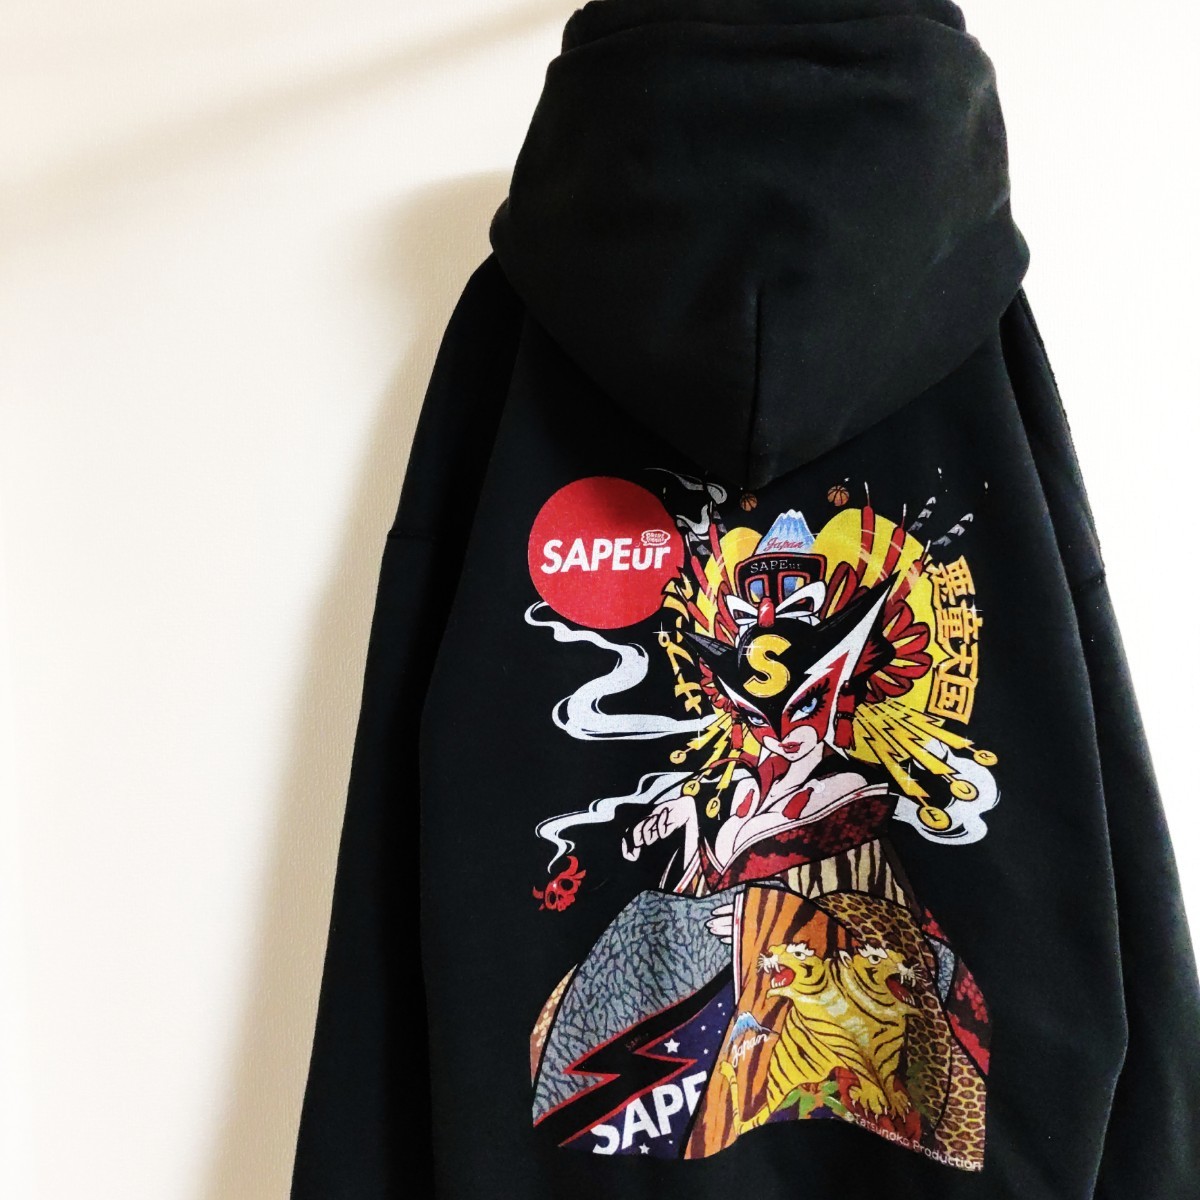 SALE／55%OFF】 ドロンジョ SAPEur タツノコ サプール パーカー HOODIE